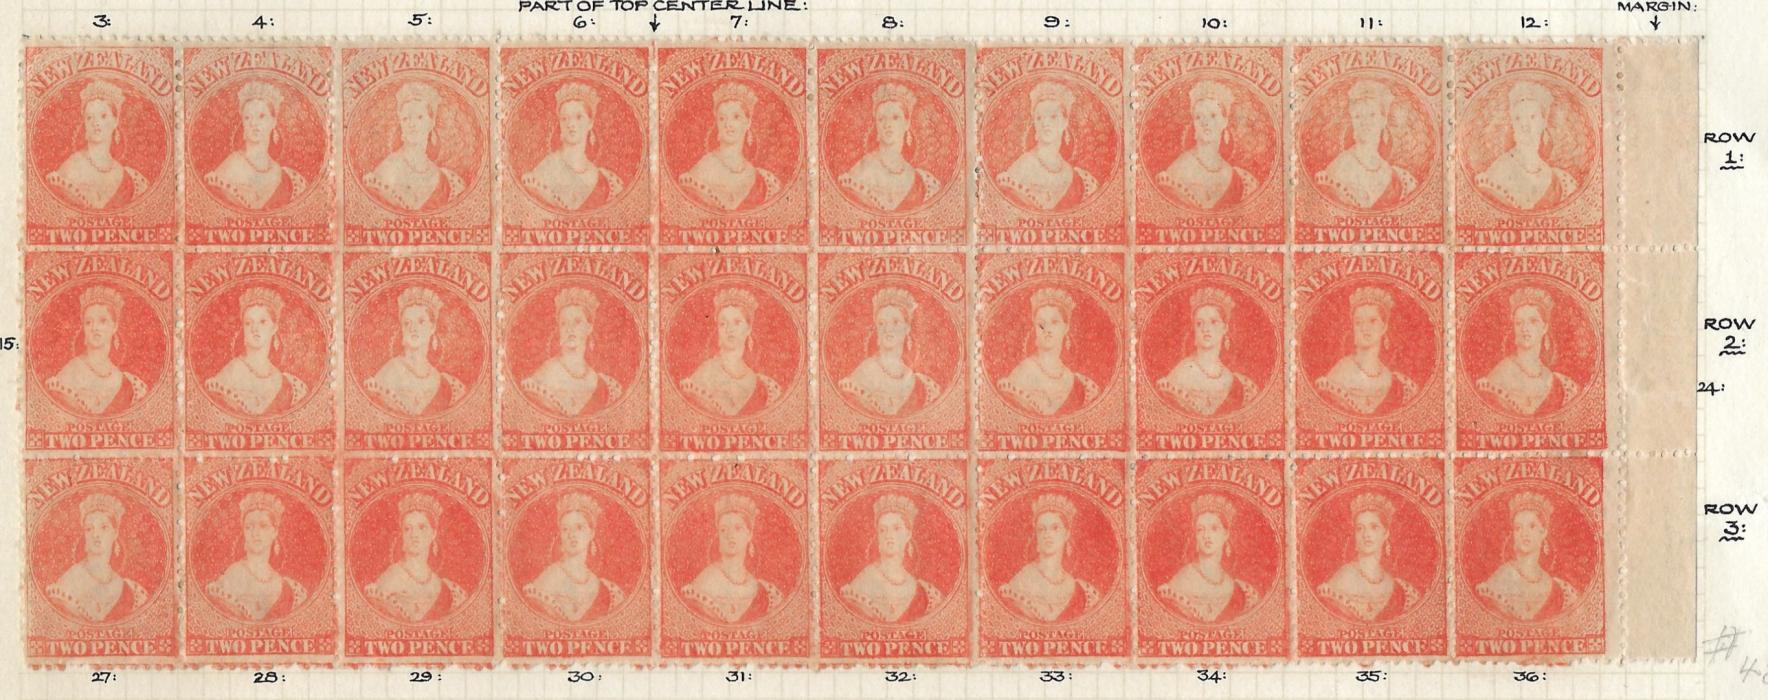 New Zealand 1872 2d. vermilion, no wmk, perf 12.5 (SG 138), right marginal block of 30 (10 x 3) from the top three rows of the sheet, with most stamps in the top row showing evidence of damage to the plate caused by overheating during printing, very fresh colour with virtually full o.g. Some slight inconsequential faults including slight central row crease, nevertheless in a remarkable state of preservation for such a multiple. A rare and impressive showpiece, ex Charles Lathrop Pack (Harmer Rooke NY 7/5/46, lot 366), on his original page.